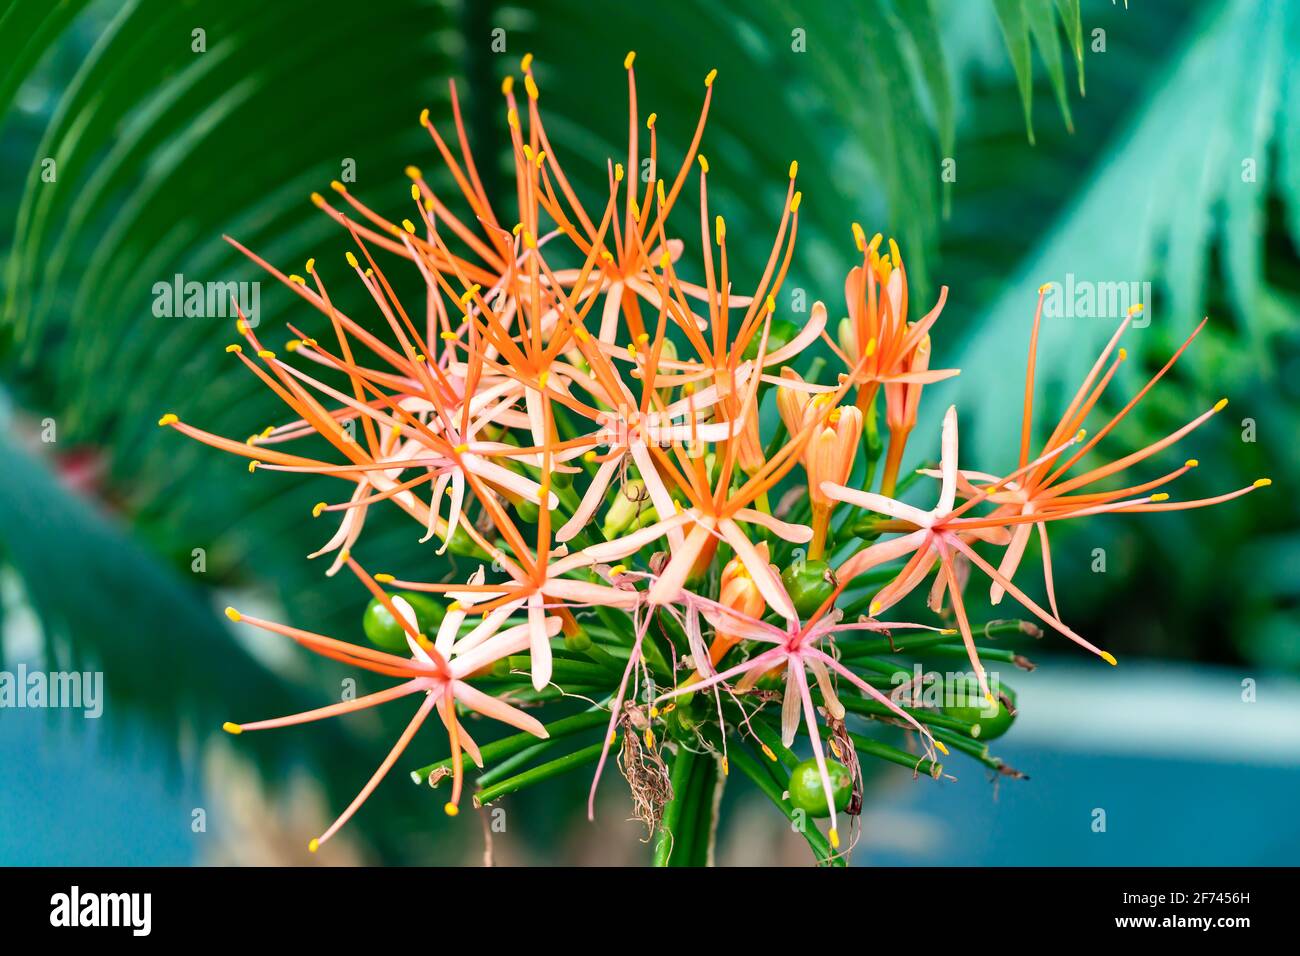 Scadoxus multiflorus, The December flower, is a tuber plant originating from Africa, Senegal, which then spread to Somalia and to southern Africa. Stock Photo